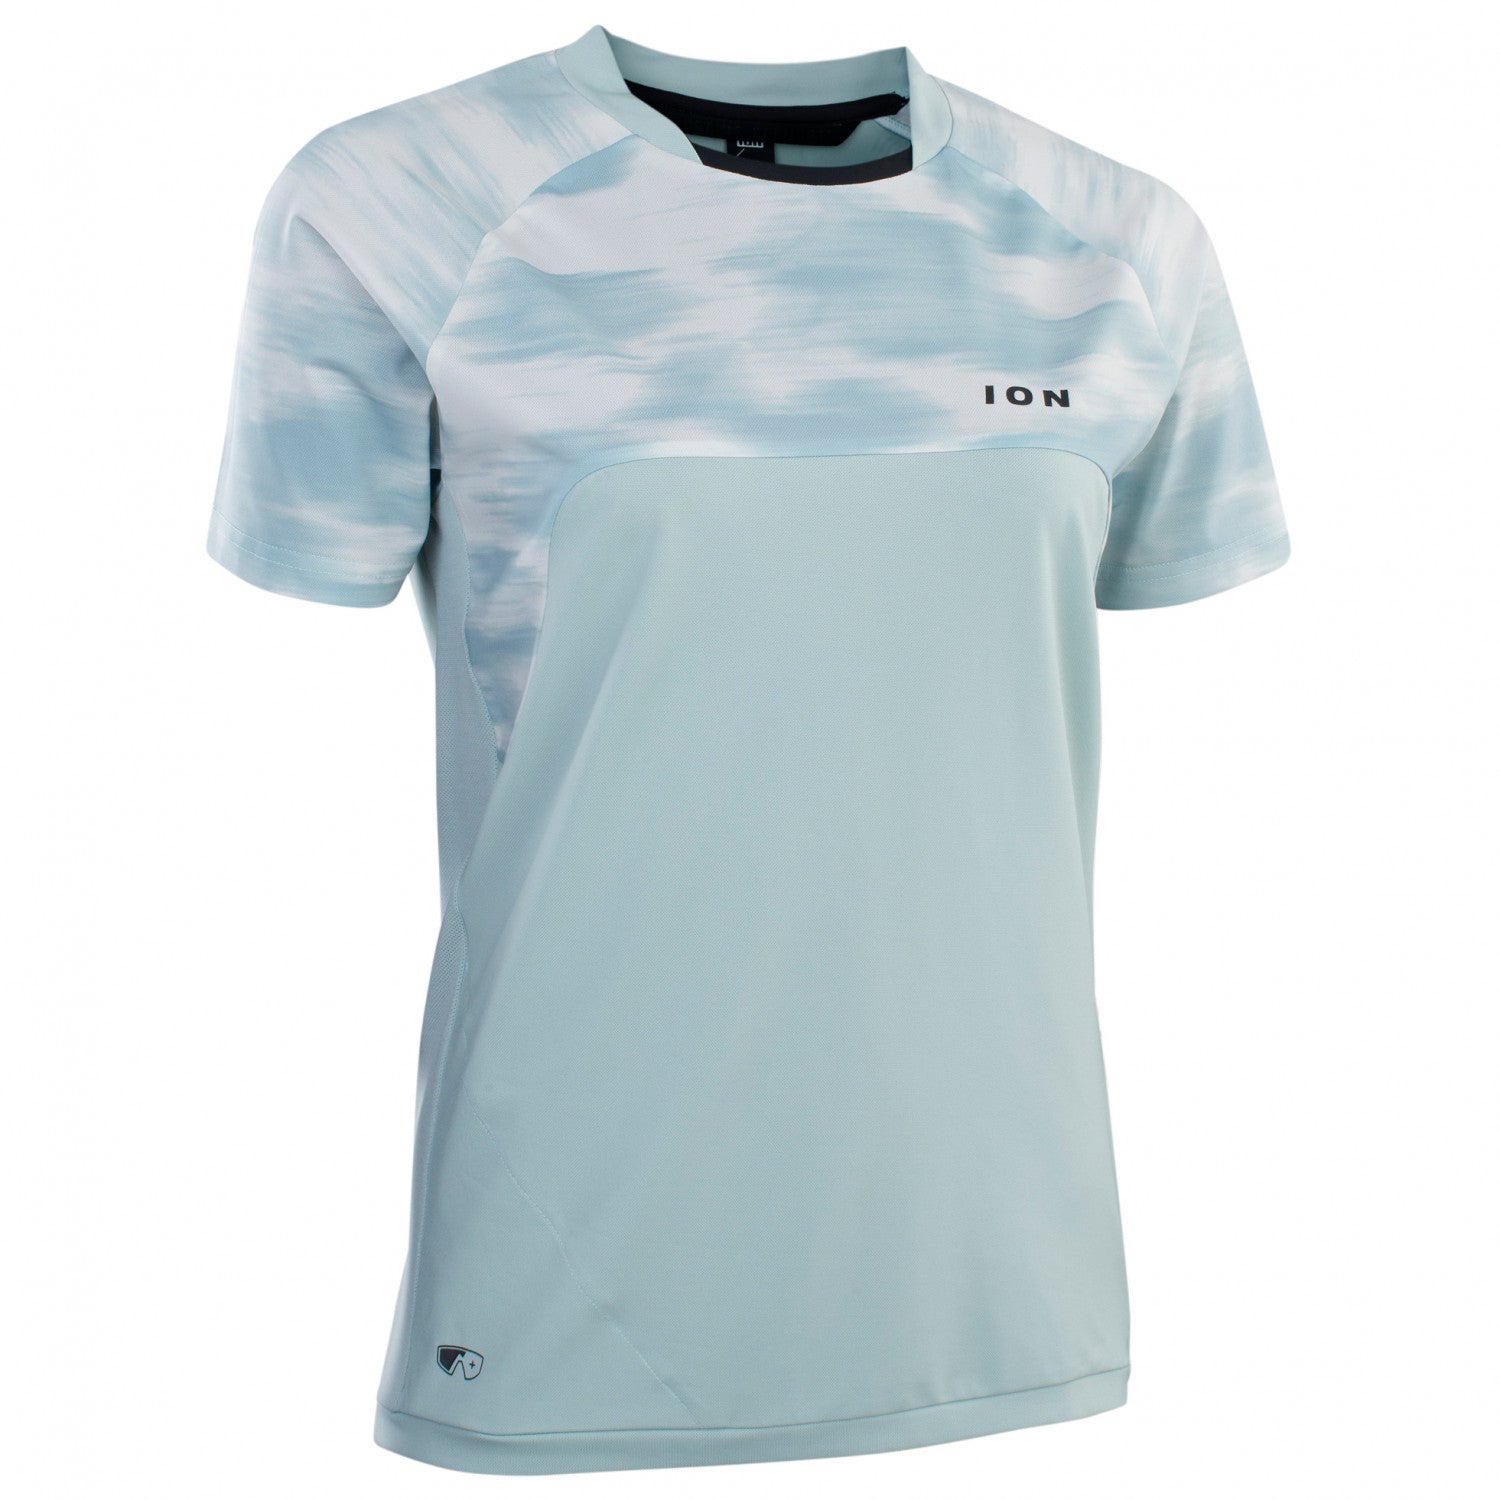 ion-womens-tee-traze-amp-s-s-aft-cycling-jersey.jpg